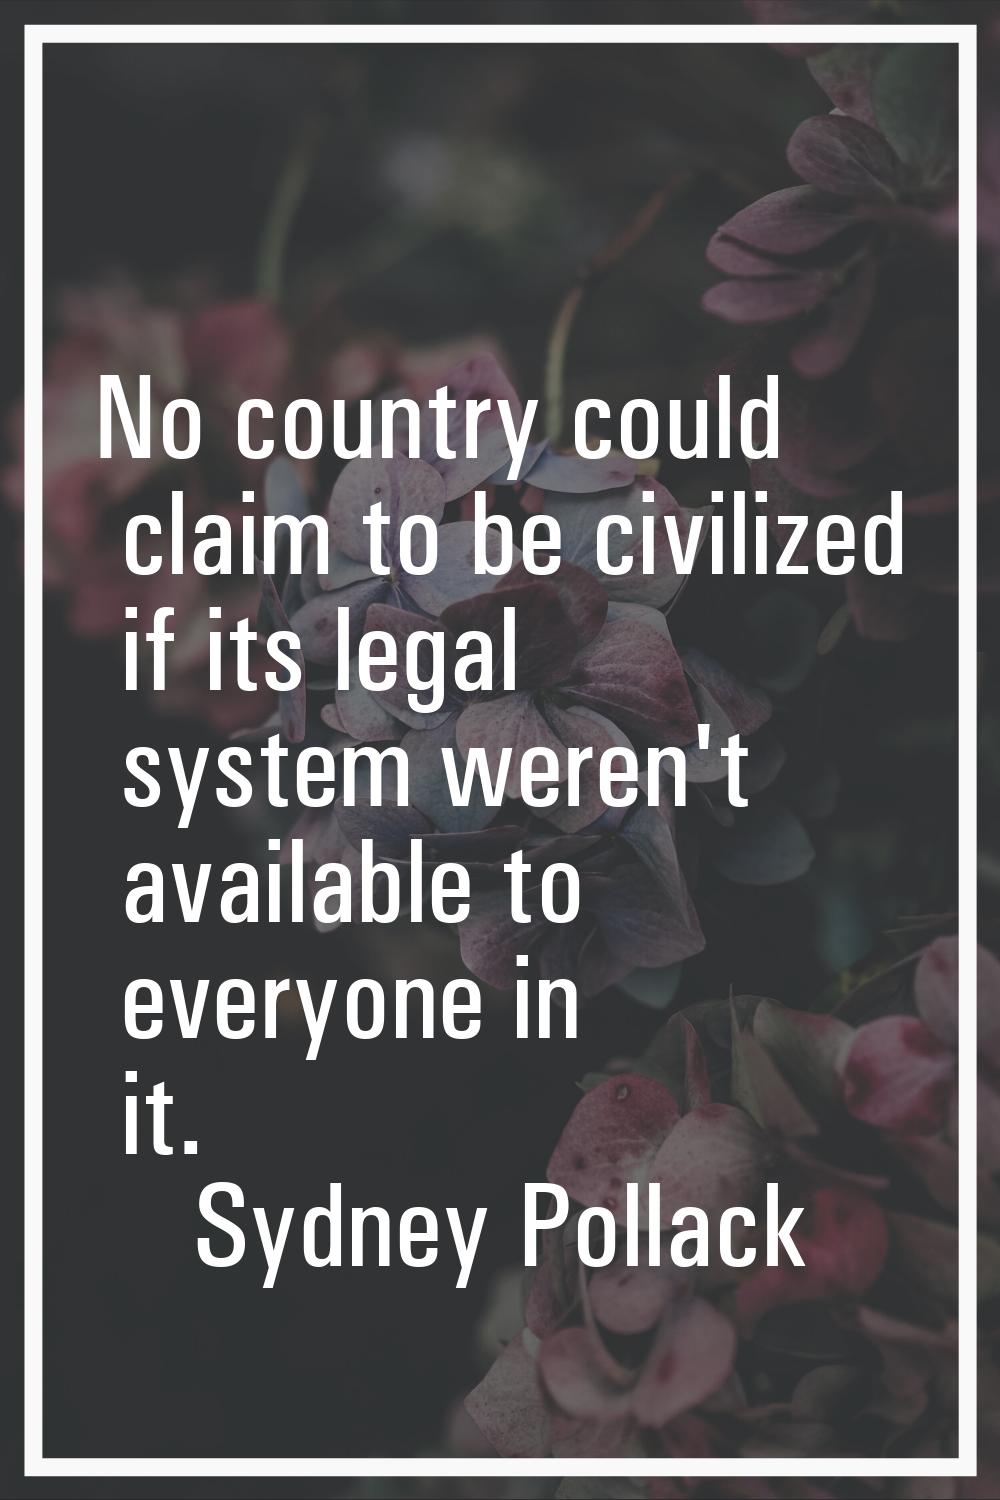 No country could claim to be civilized if its legal system weren't available to everyone in it.